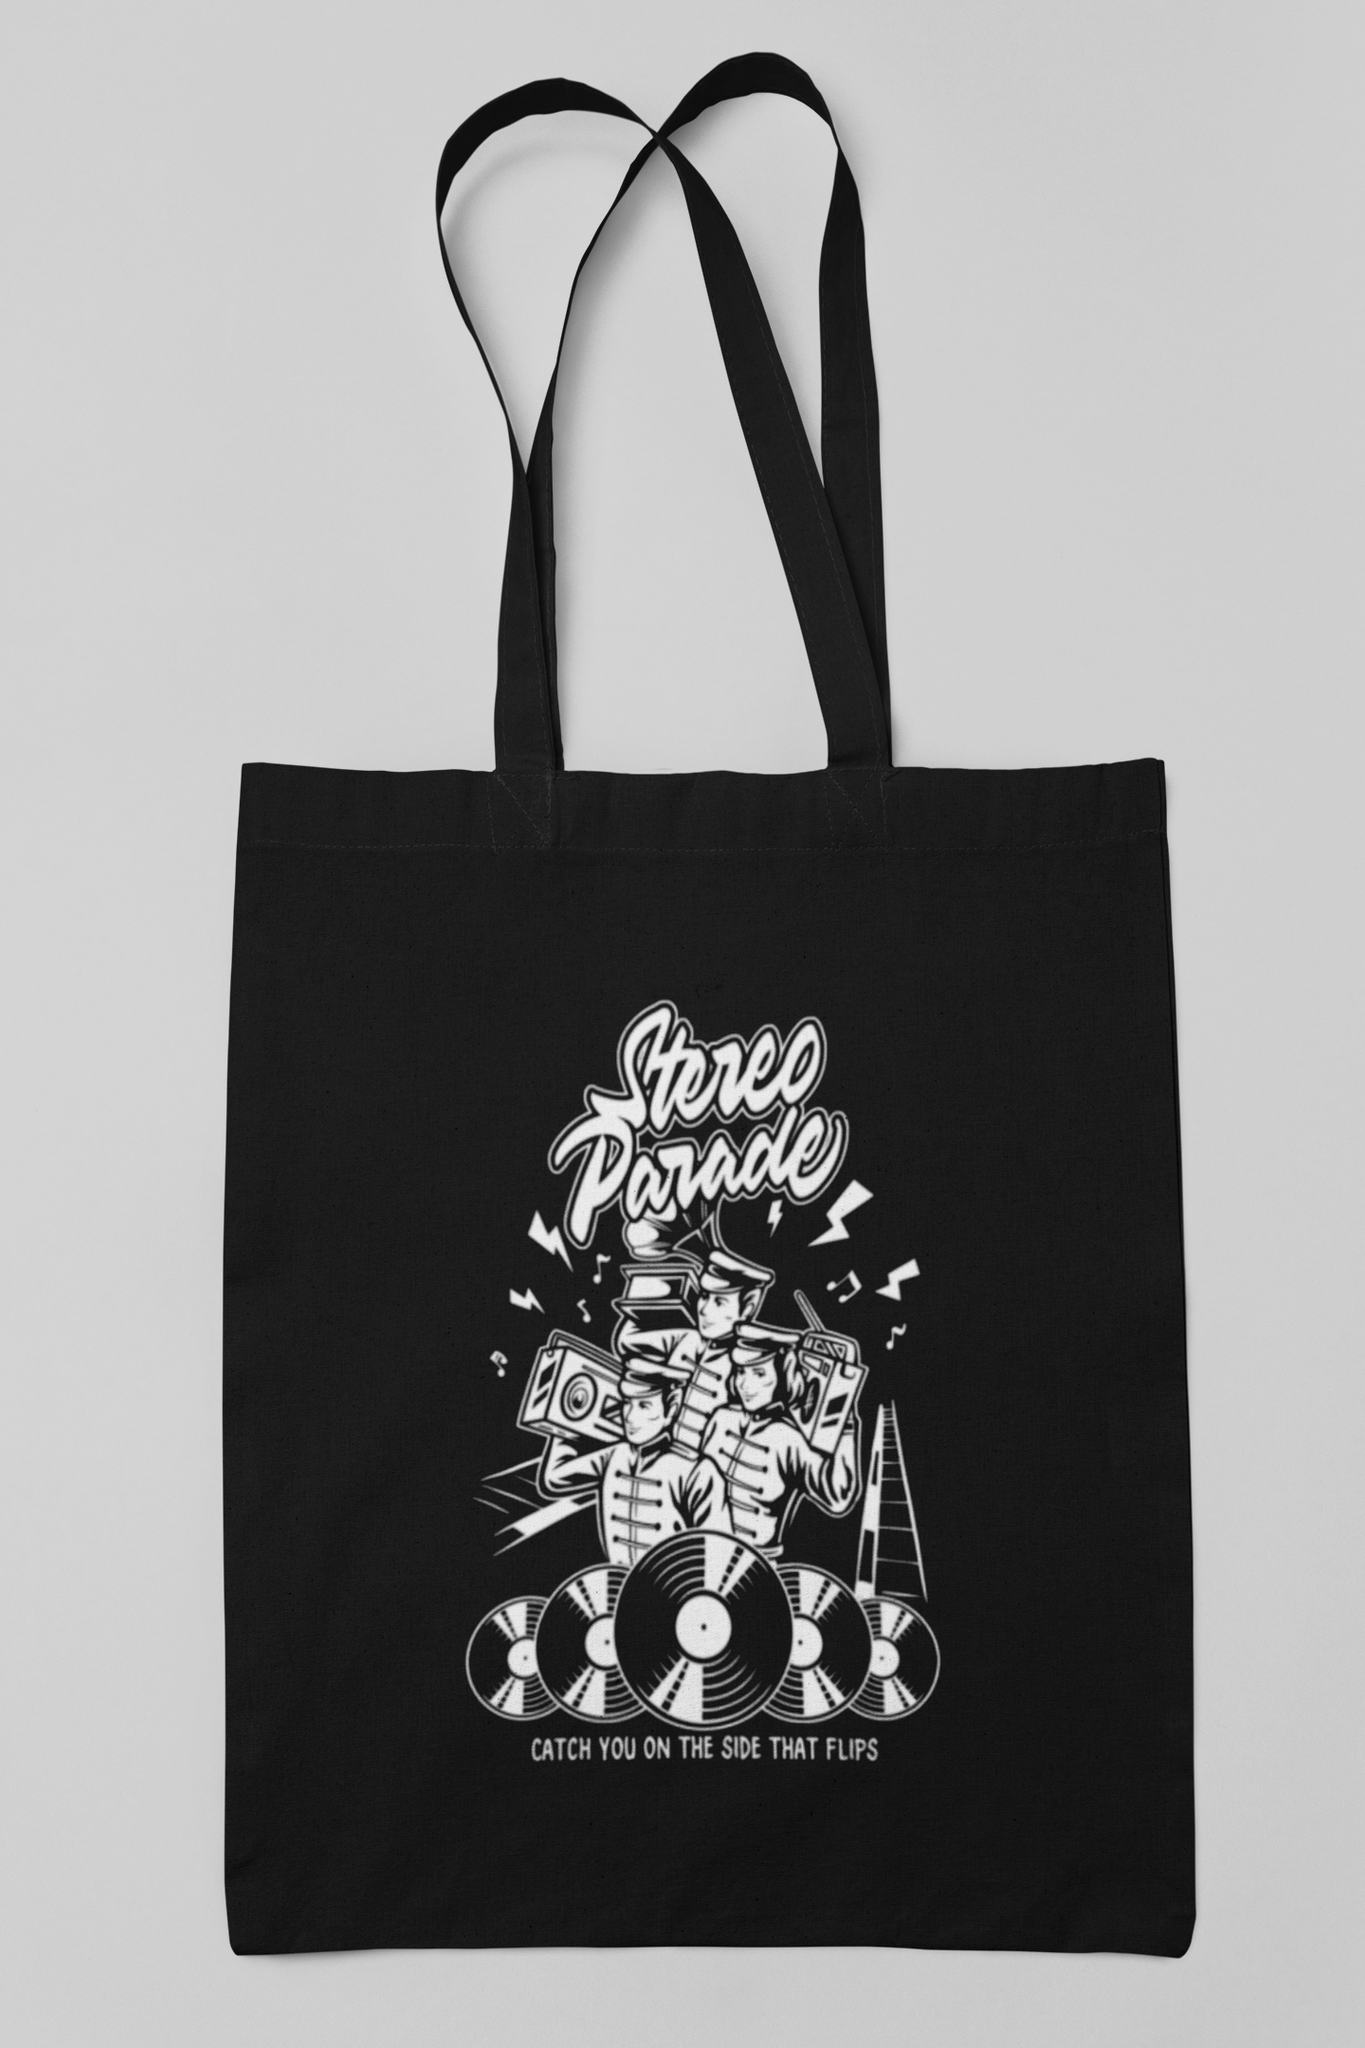 stereoparade "Catch You on the Side that Flips" Tote